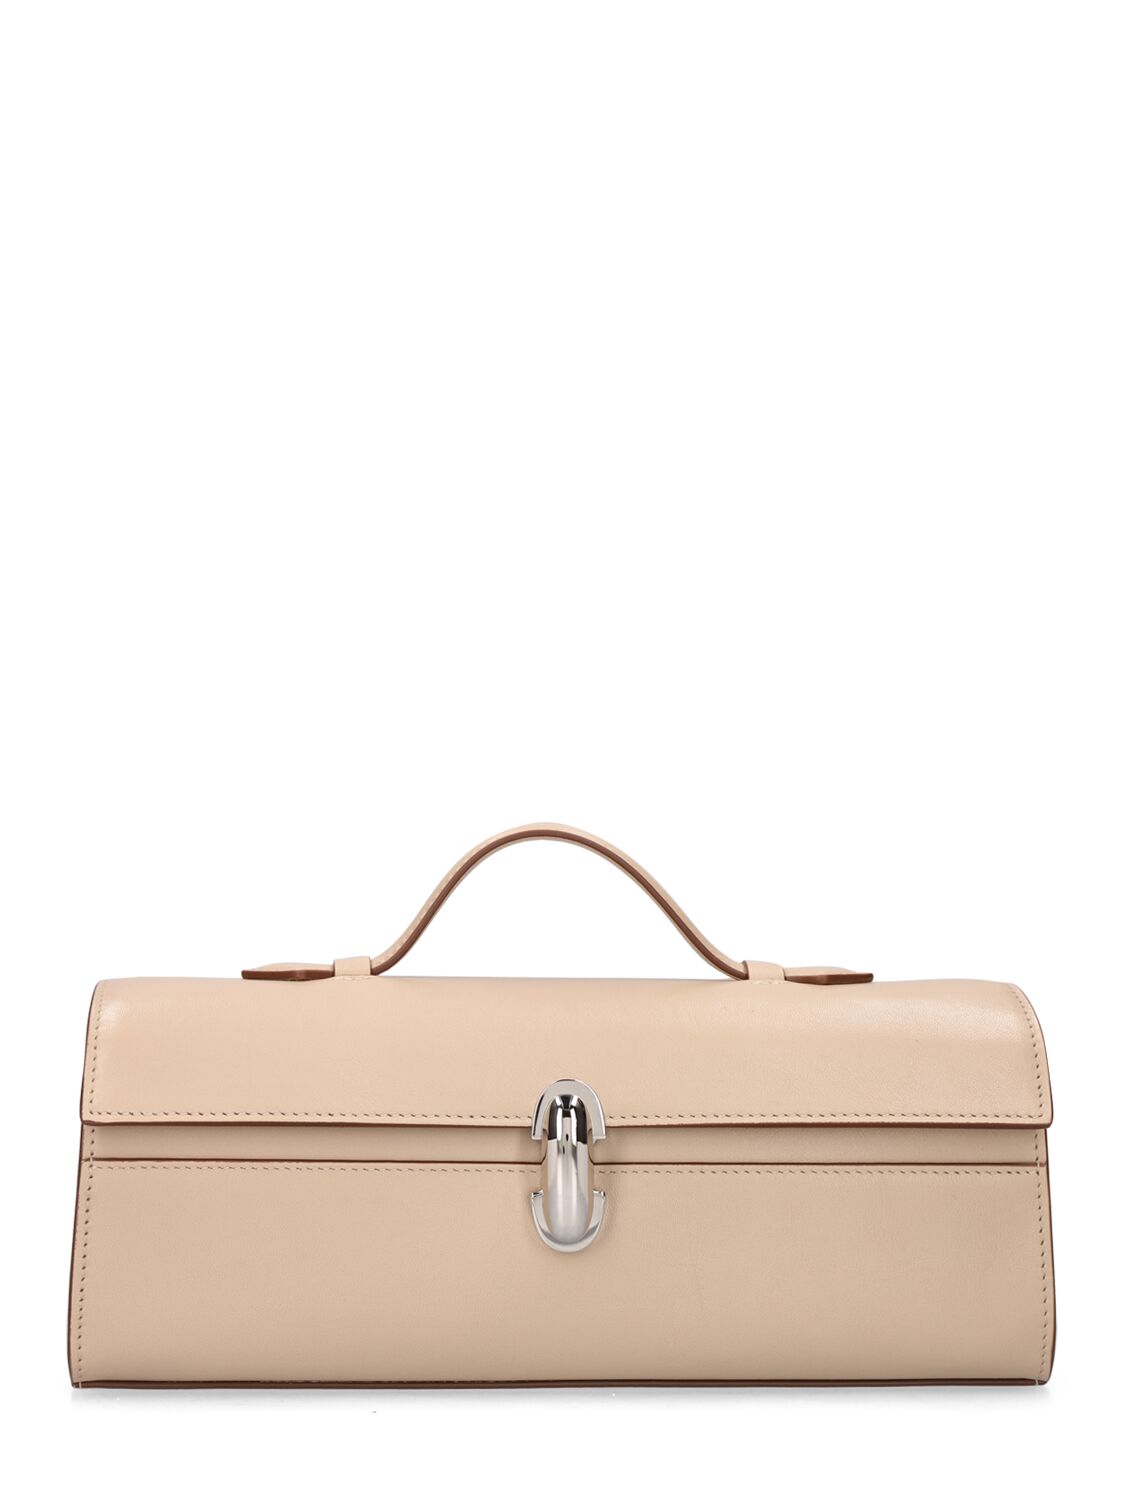 Image of Slim Symmetry Grained Leather Bag